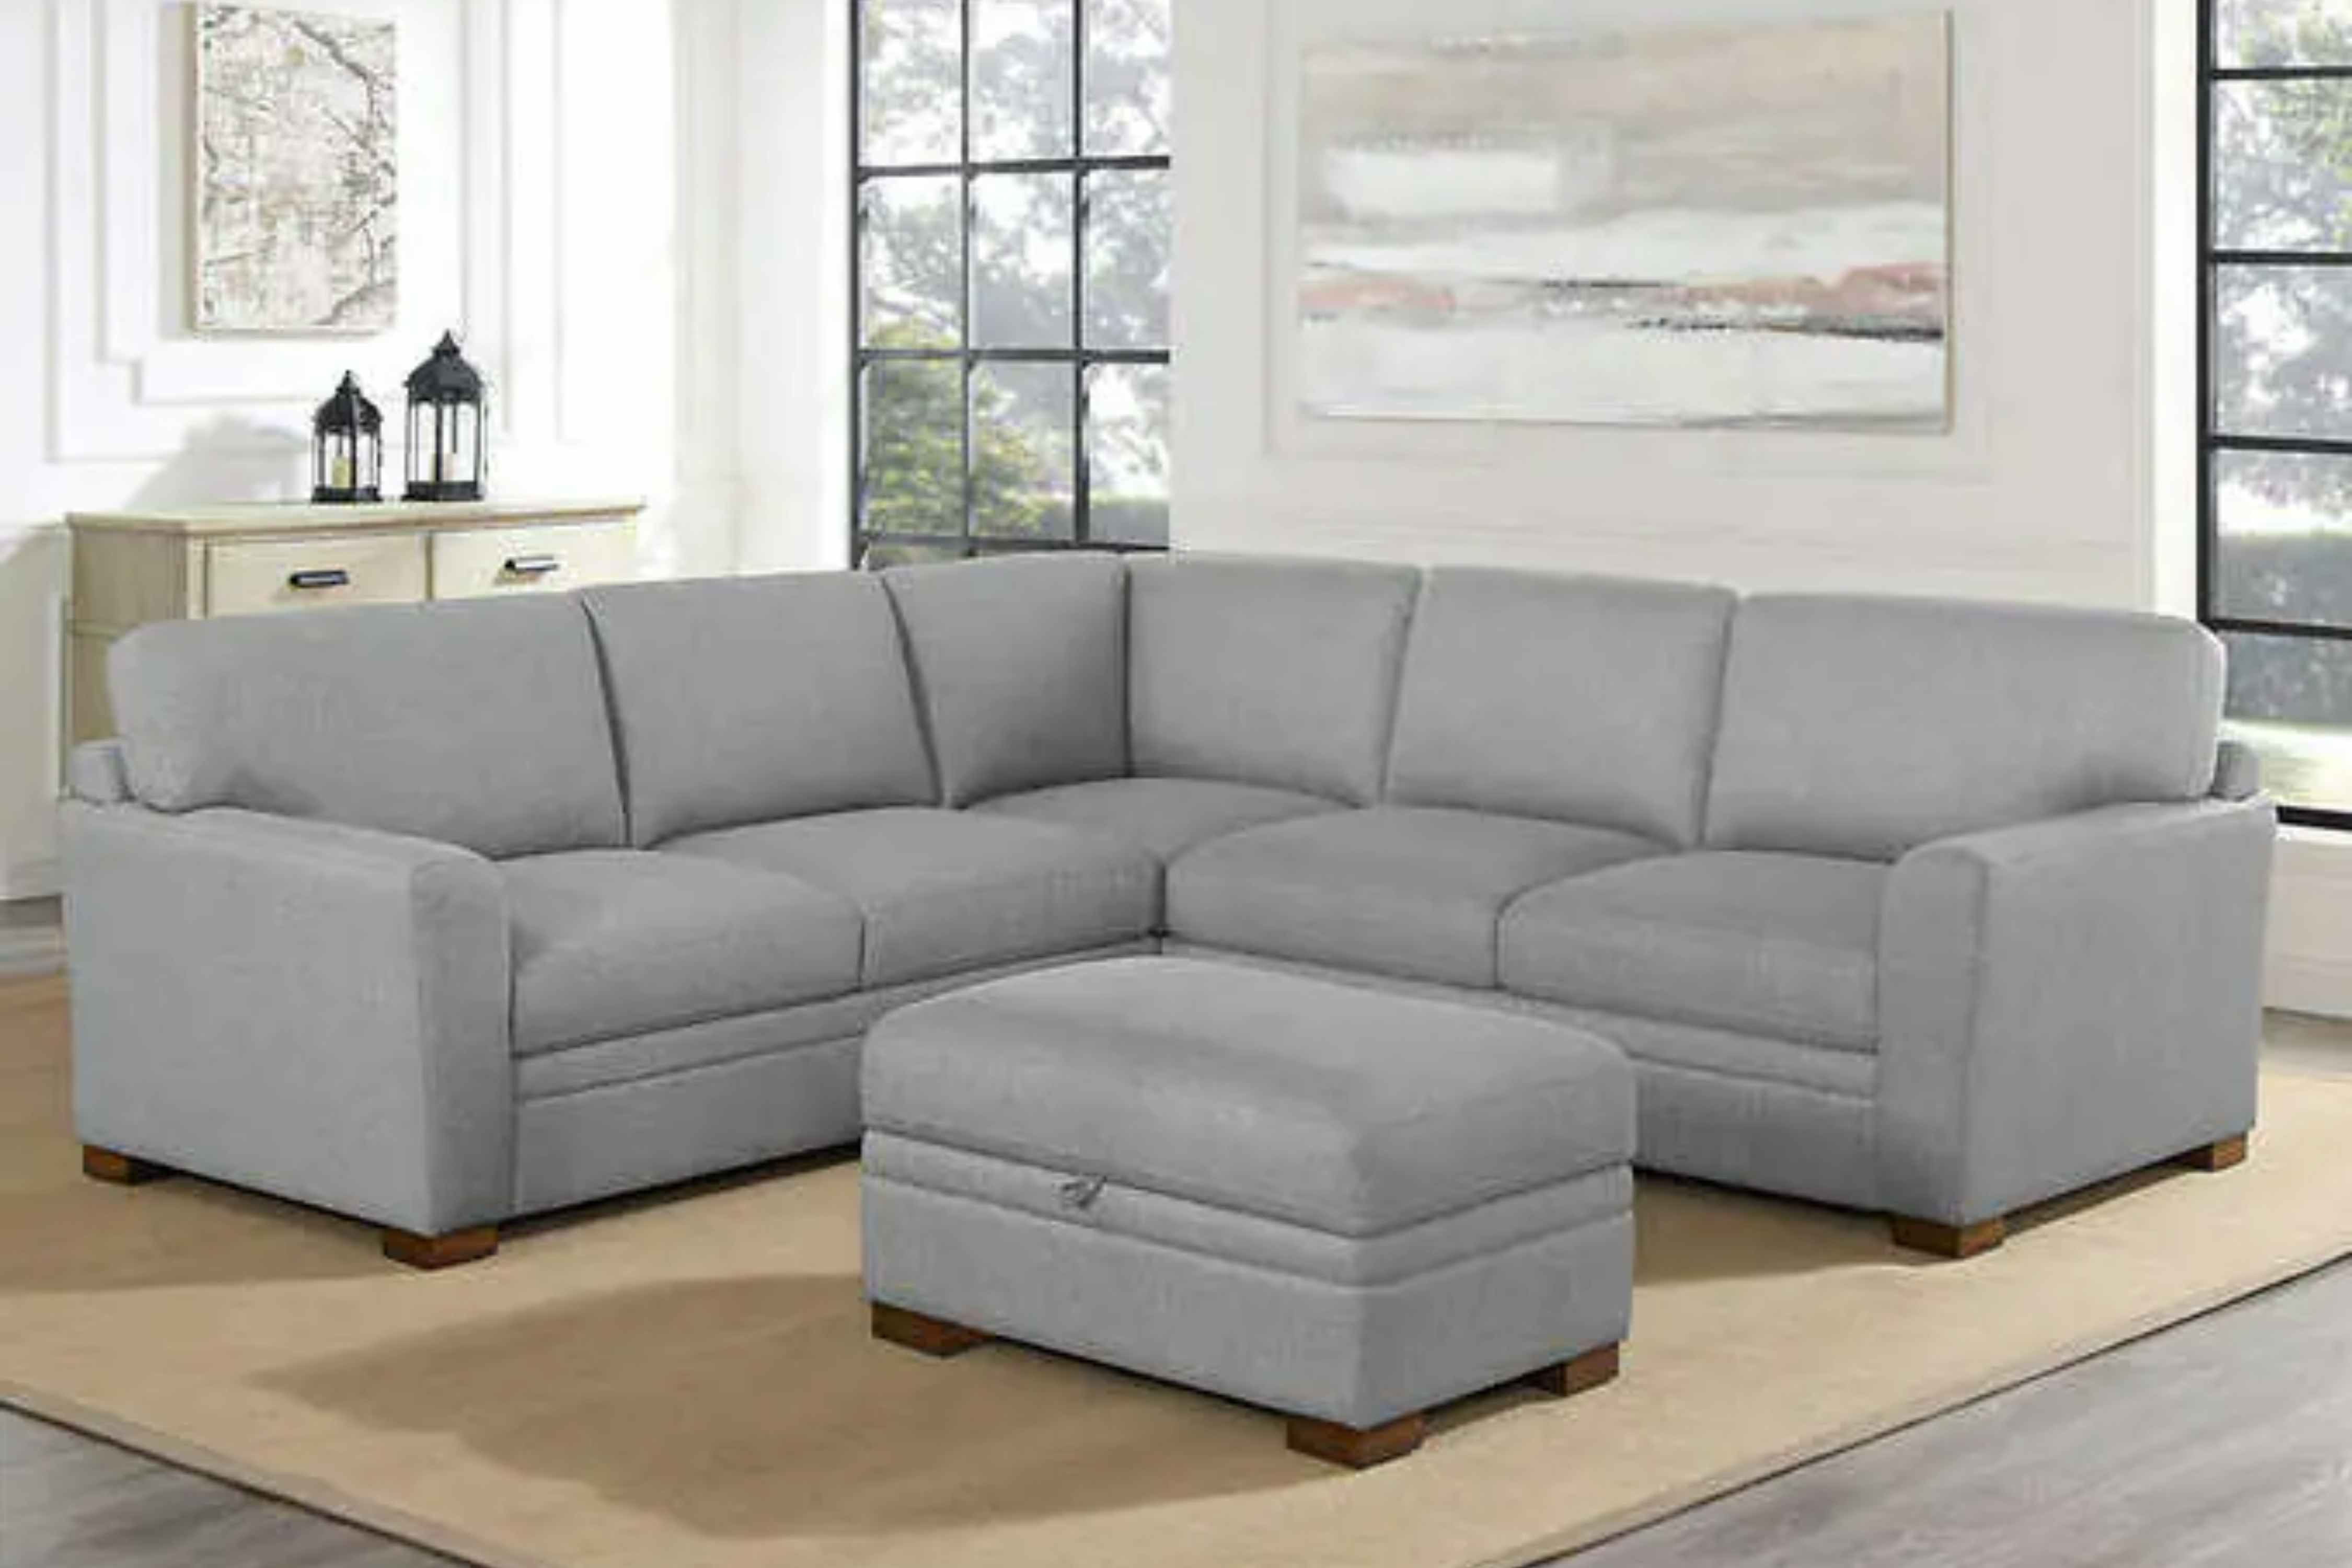 Save $200 on the Thomasville Sectional With Storage Ottoman on Costco.com